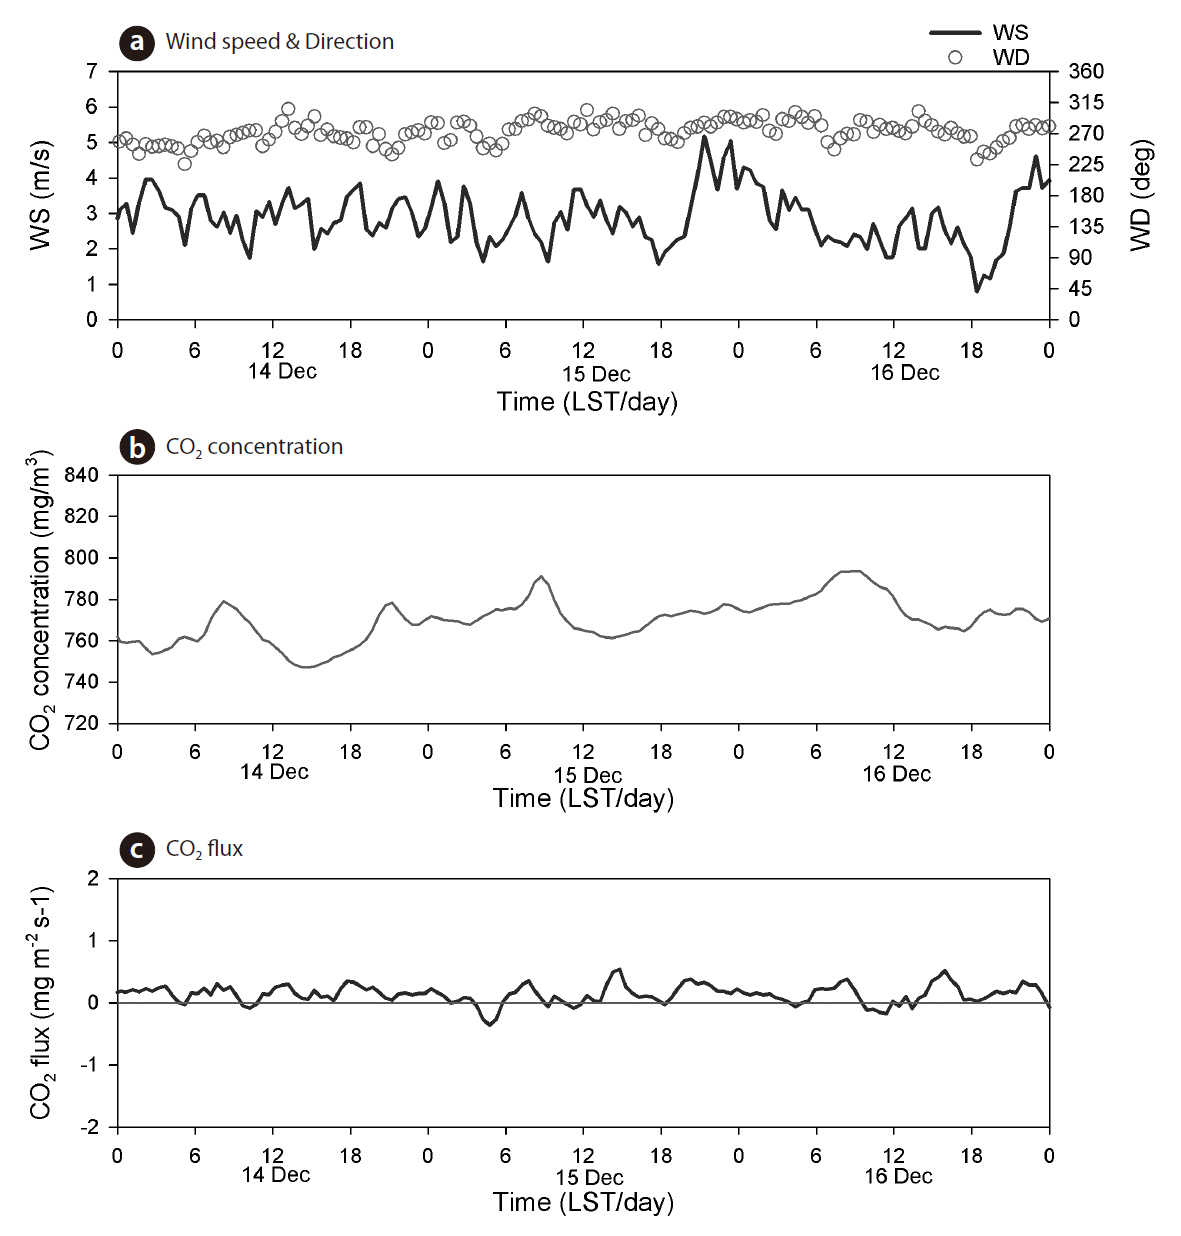 Time series of (a) wind speed (WS thick line m/s) and direction (WD open circle deg) (b) CO2 concentration (mg/m3) and (c) CO2 flux (mg m-2 s-1) during the winter period from 14 to 16 December 2009.